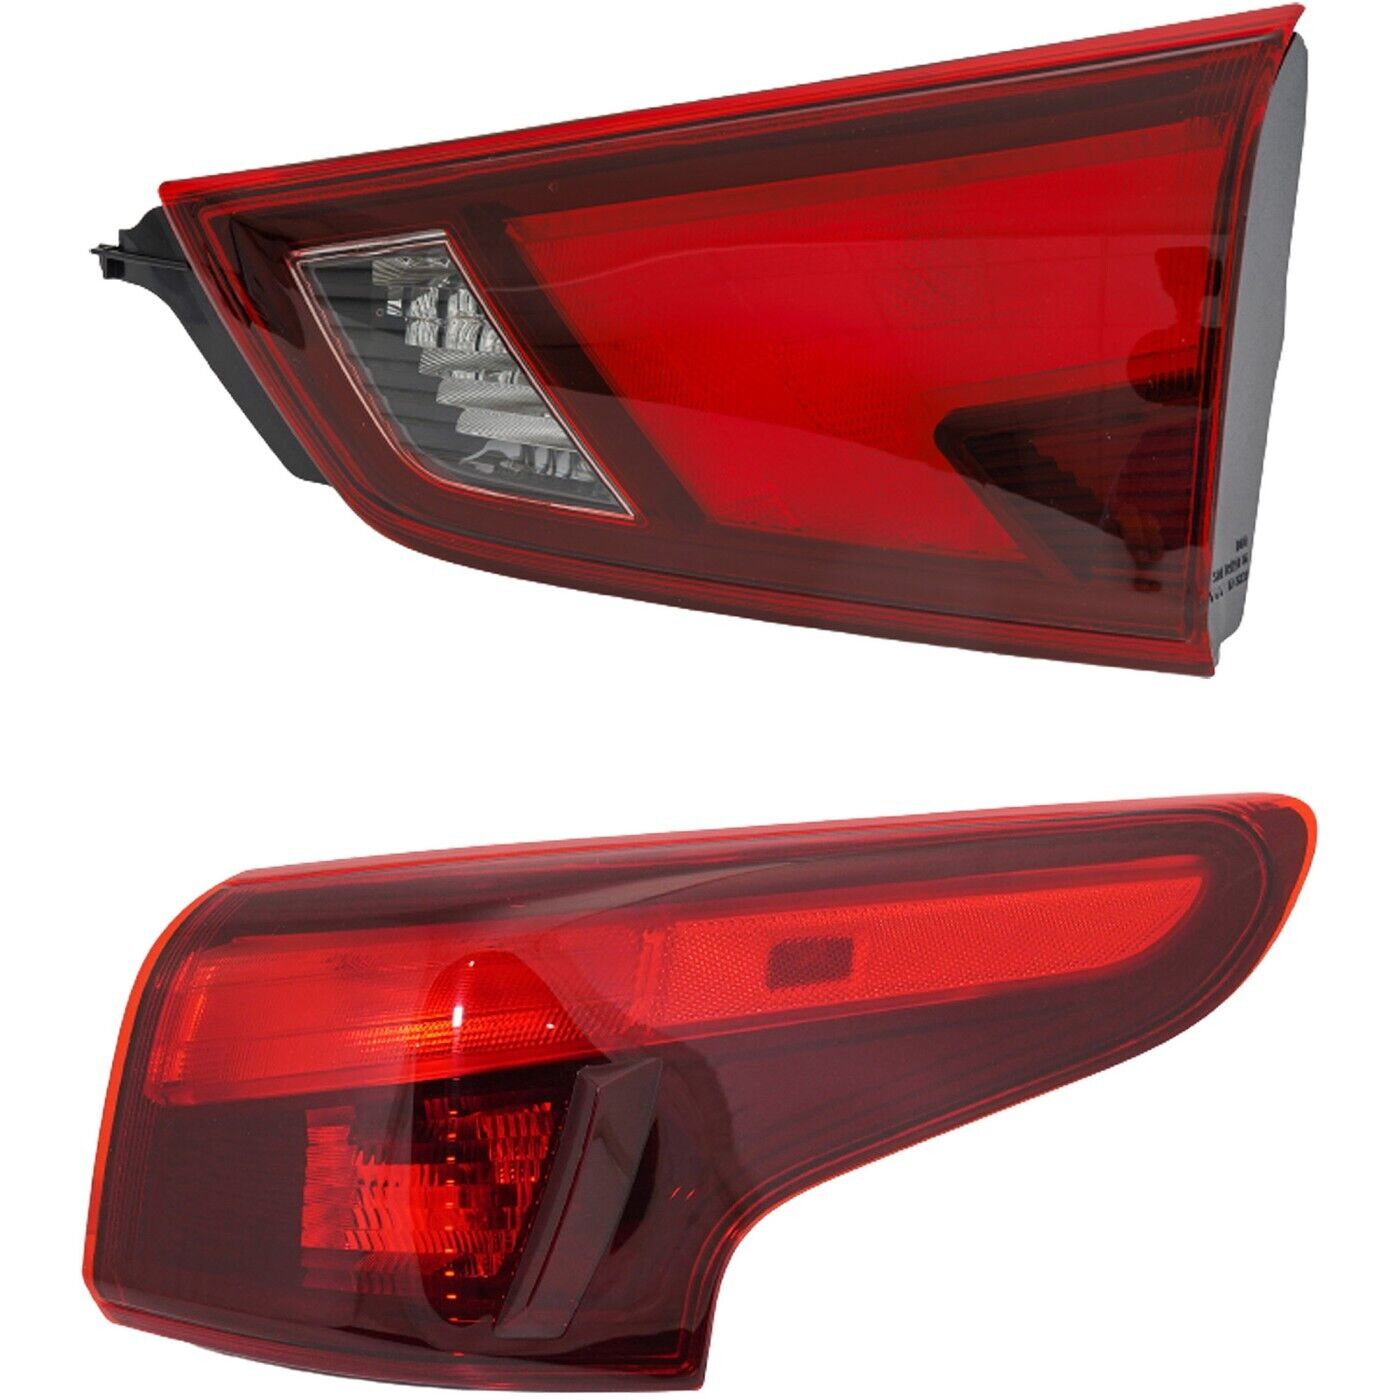 Set of 2 Tail Lights Taillights Taillamps Brakelights  Passenger Right Side Pair